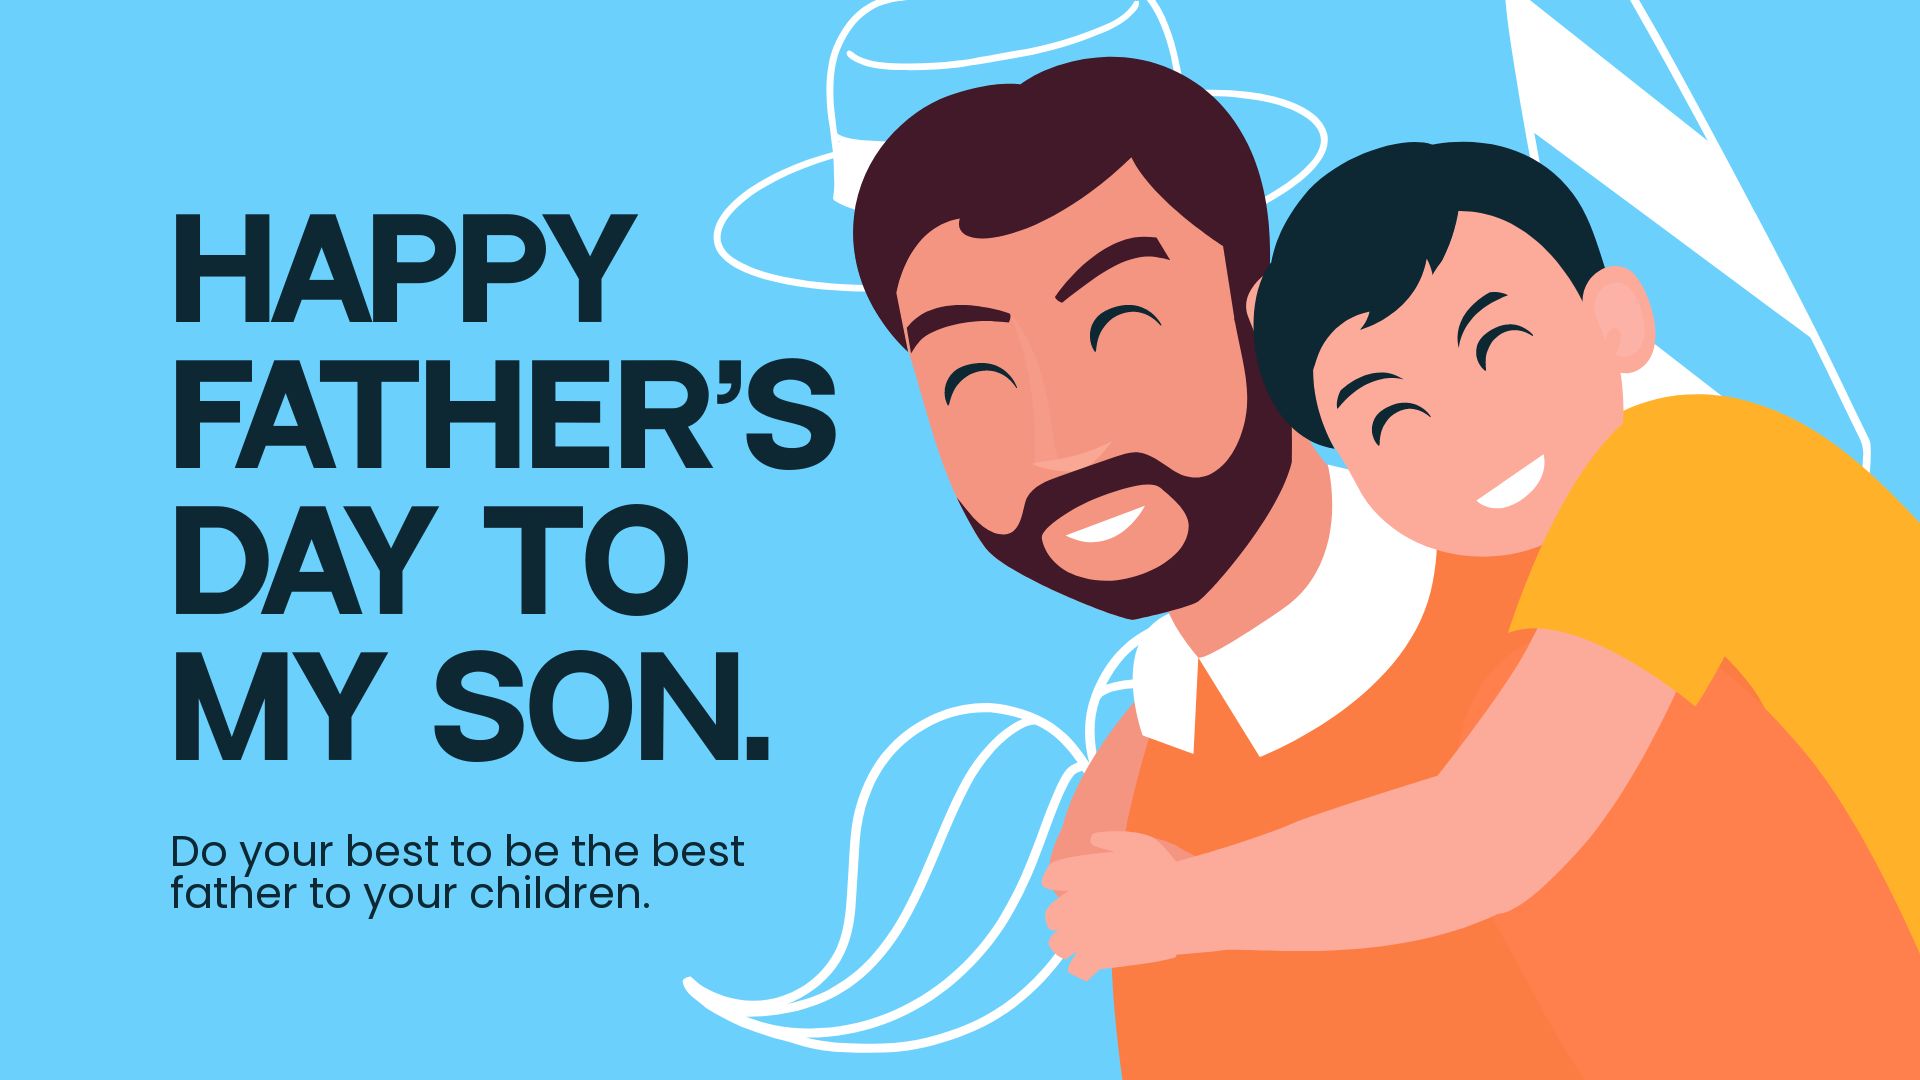 Animated Happy Father's Day Image in Illustrator, SVG, JPG, GIF, EPS